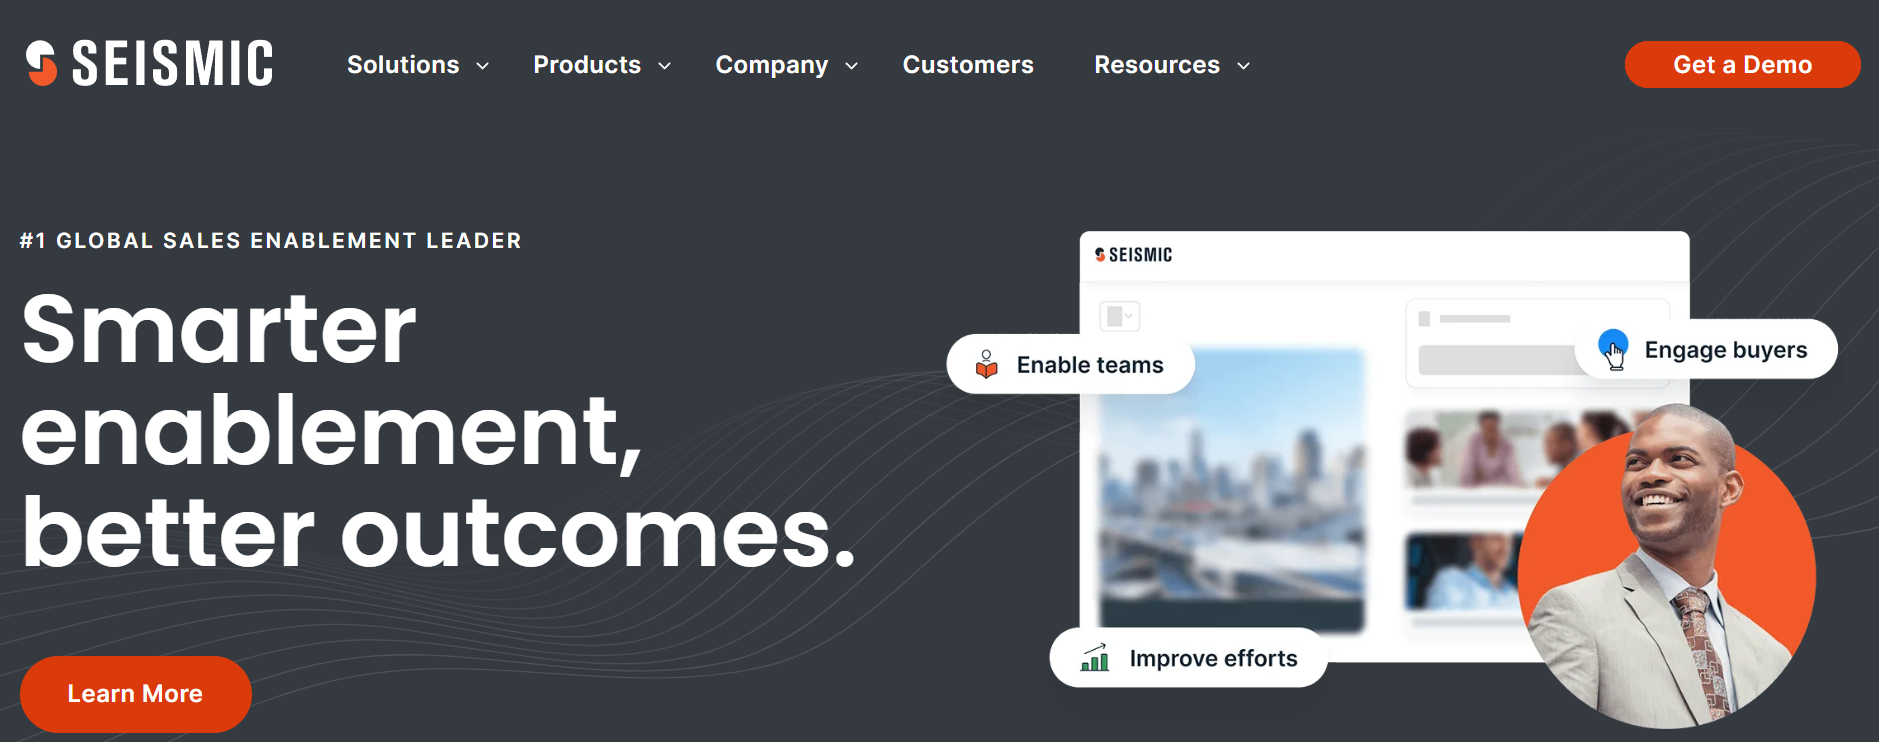 Seismic homepage: Smarter enablement, better outcomes.